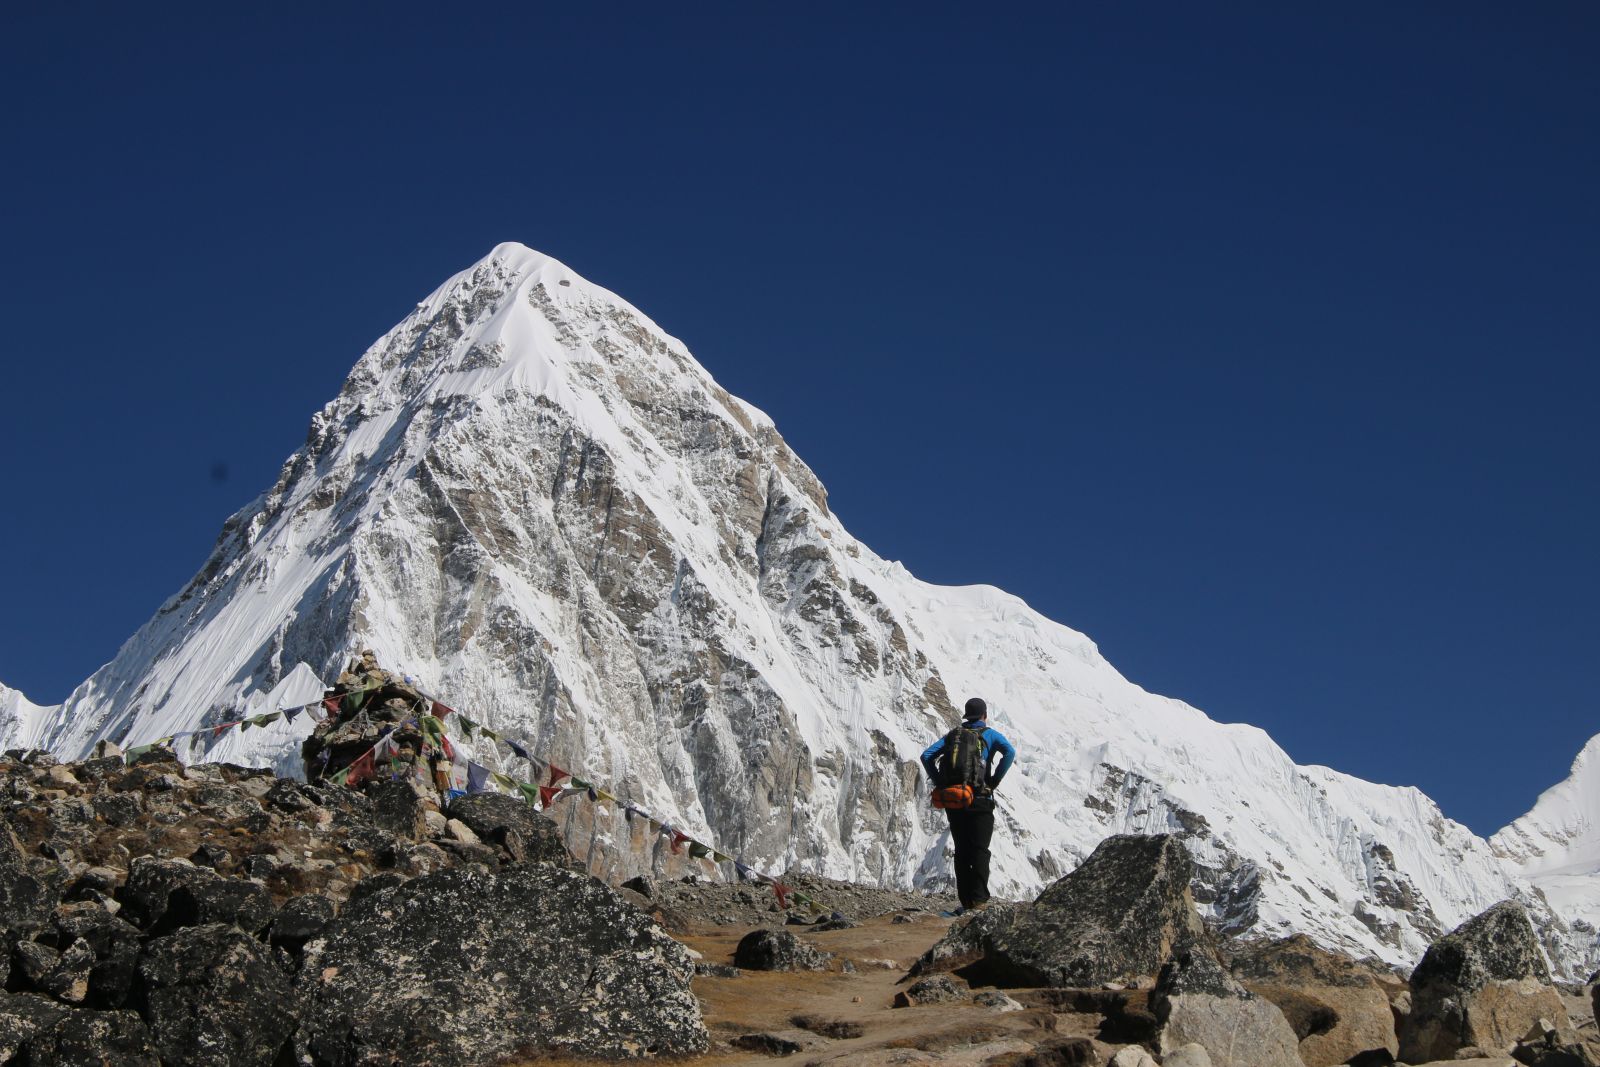 Pumori - One of the mountains in the Everest